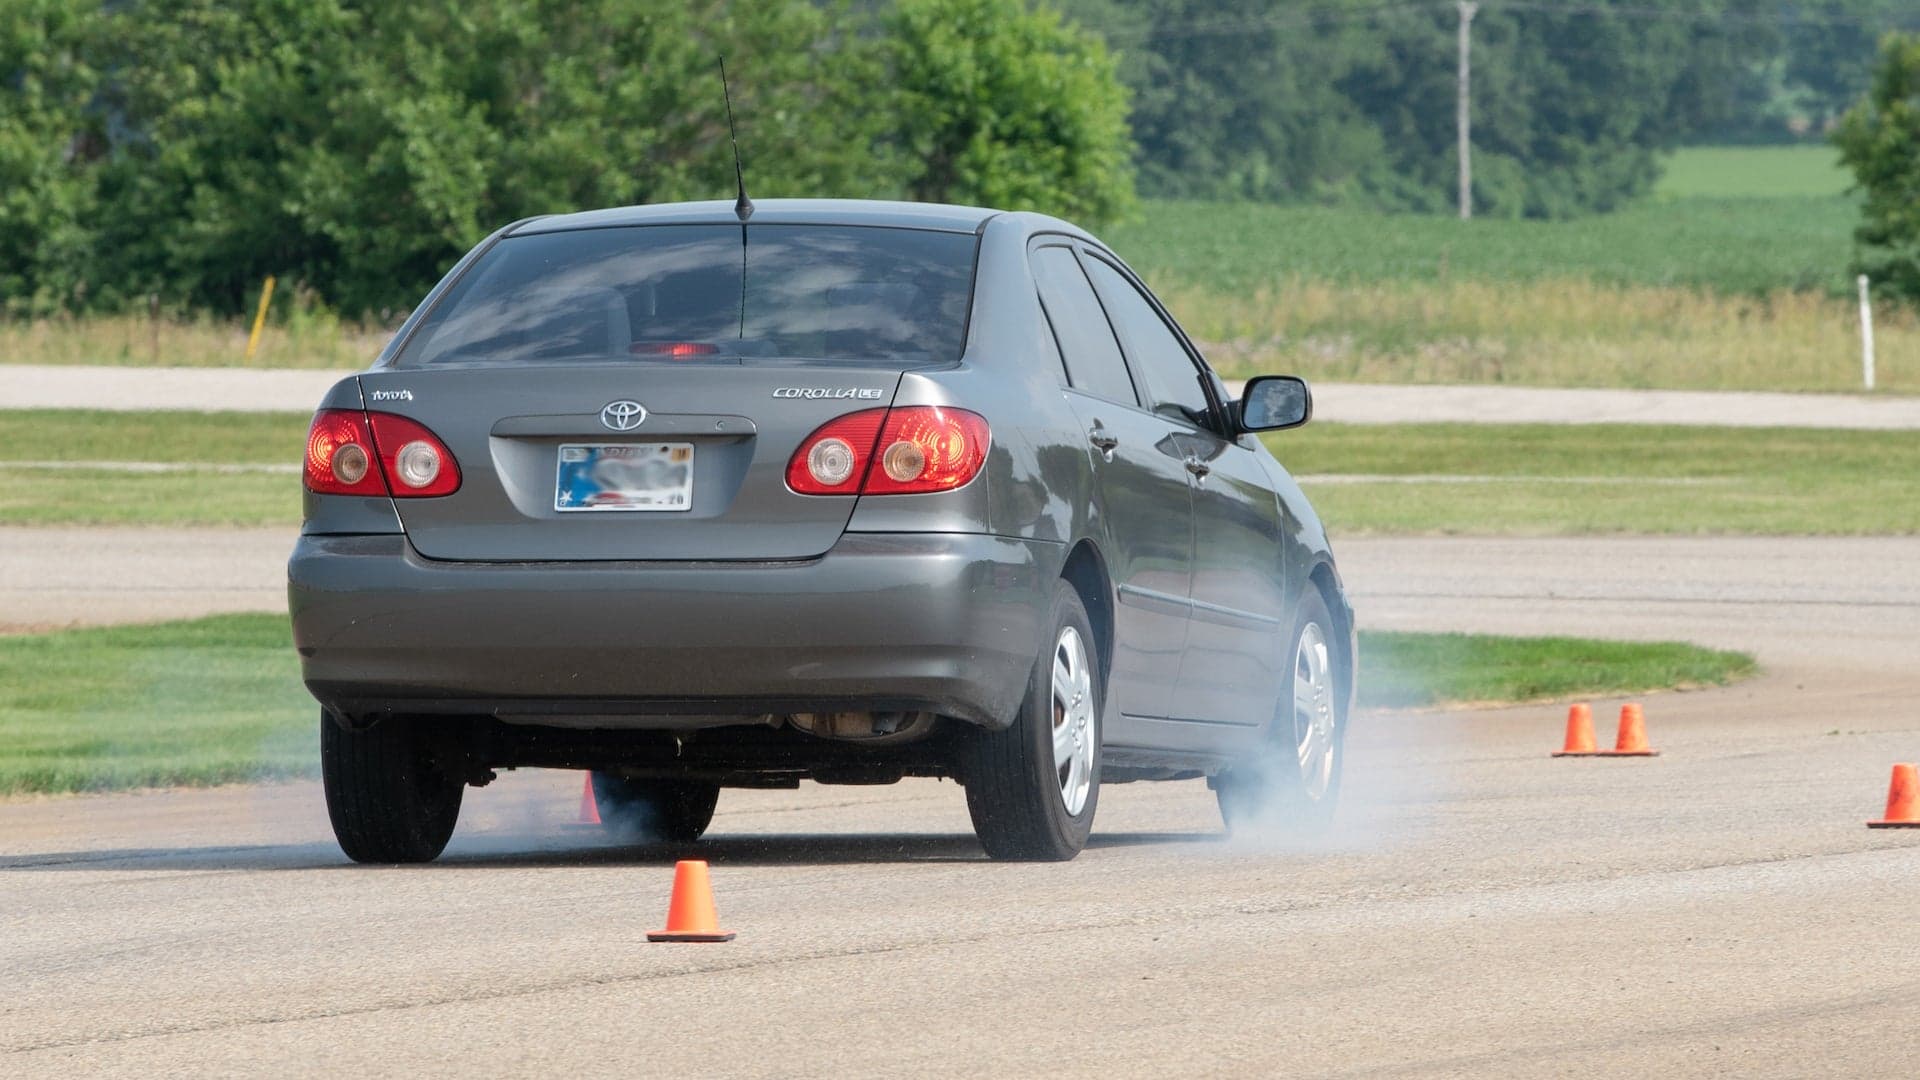 Driver’s Ed Is Just the Beginning: This Is How to Make Teens Safer on the Road